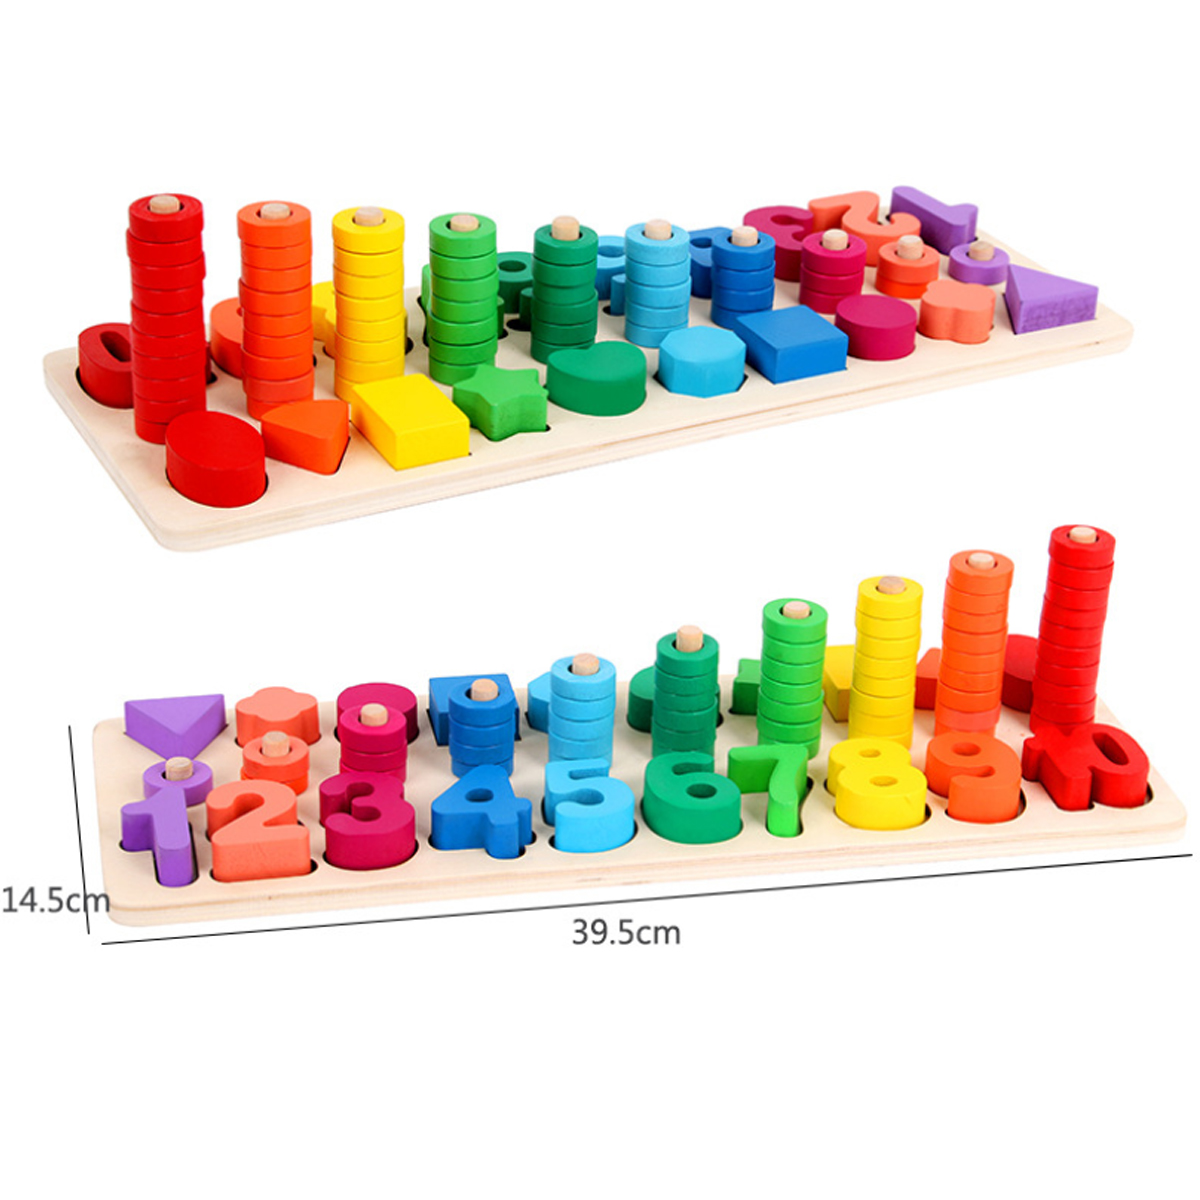 Wooden-Math-Toy-Board-Montessori-Counting-Board-Preschool-Learning-Toys-for-Children-Gifts-1629382-9